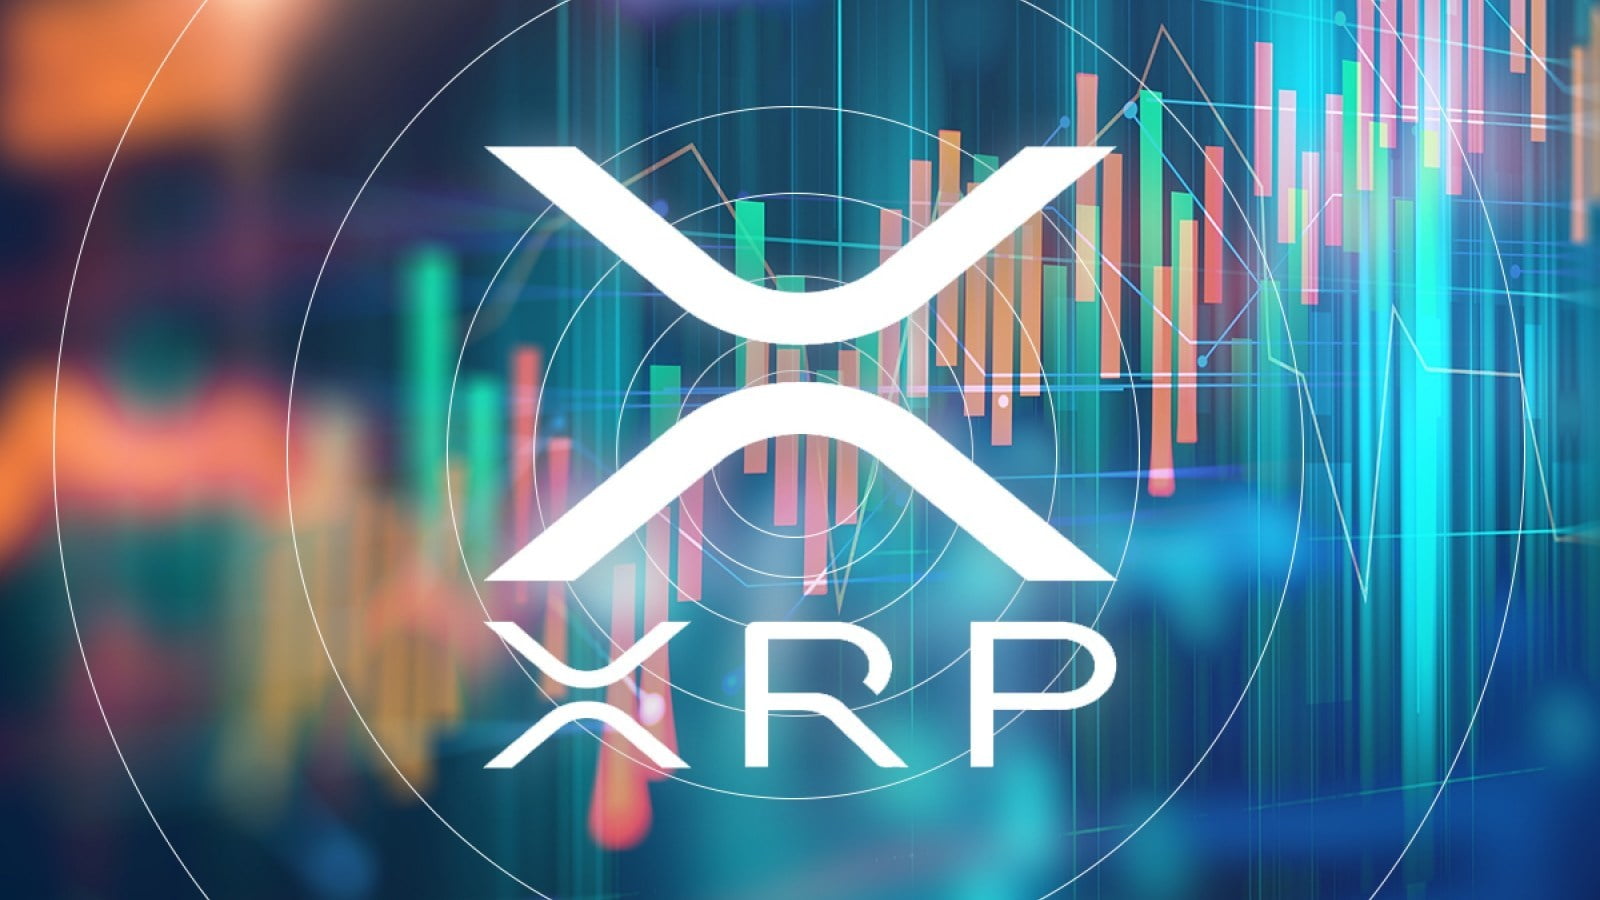 XRP Rally Is Just Getting Started, Says Analyst